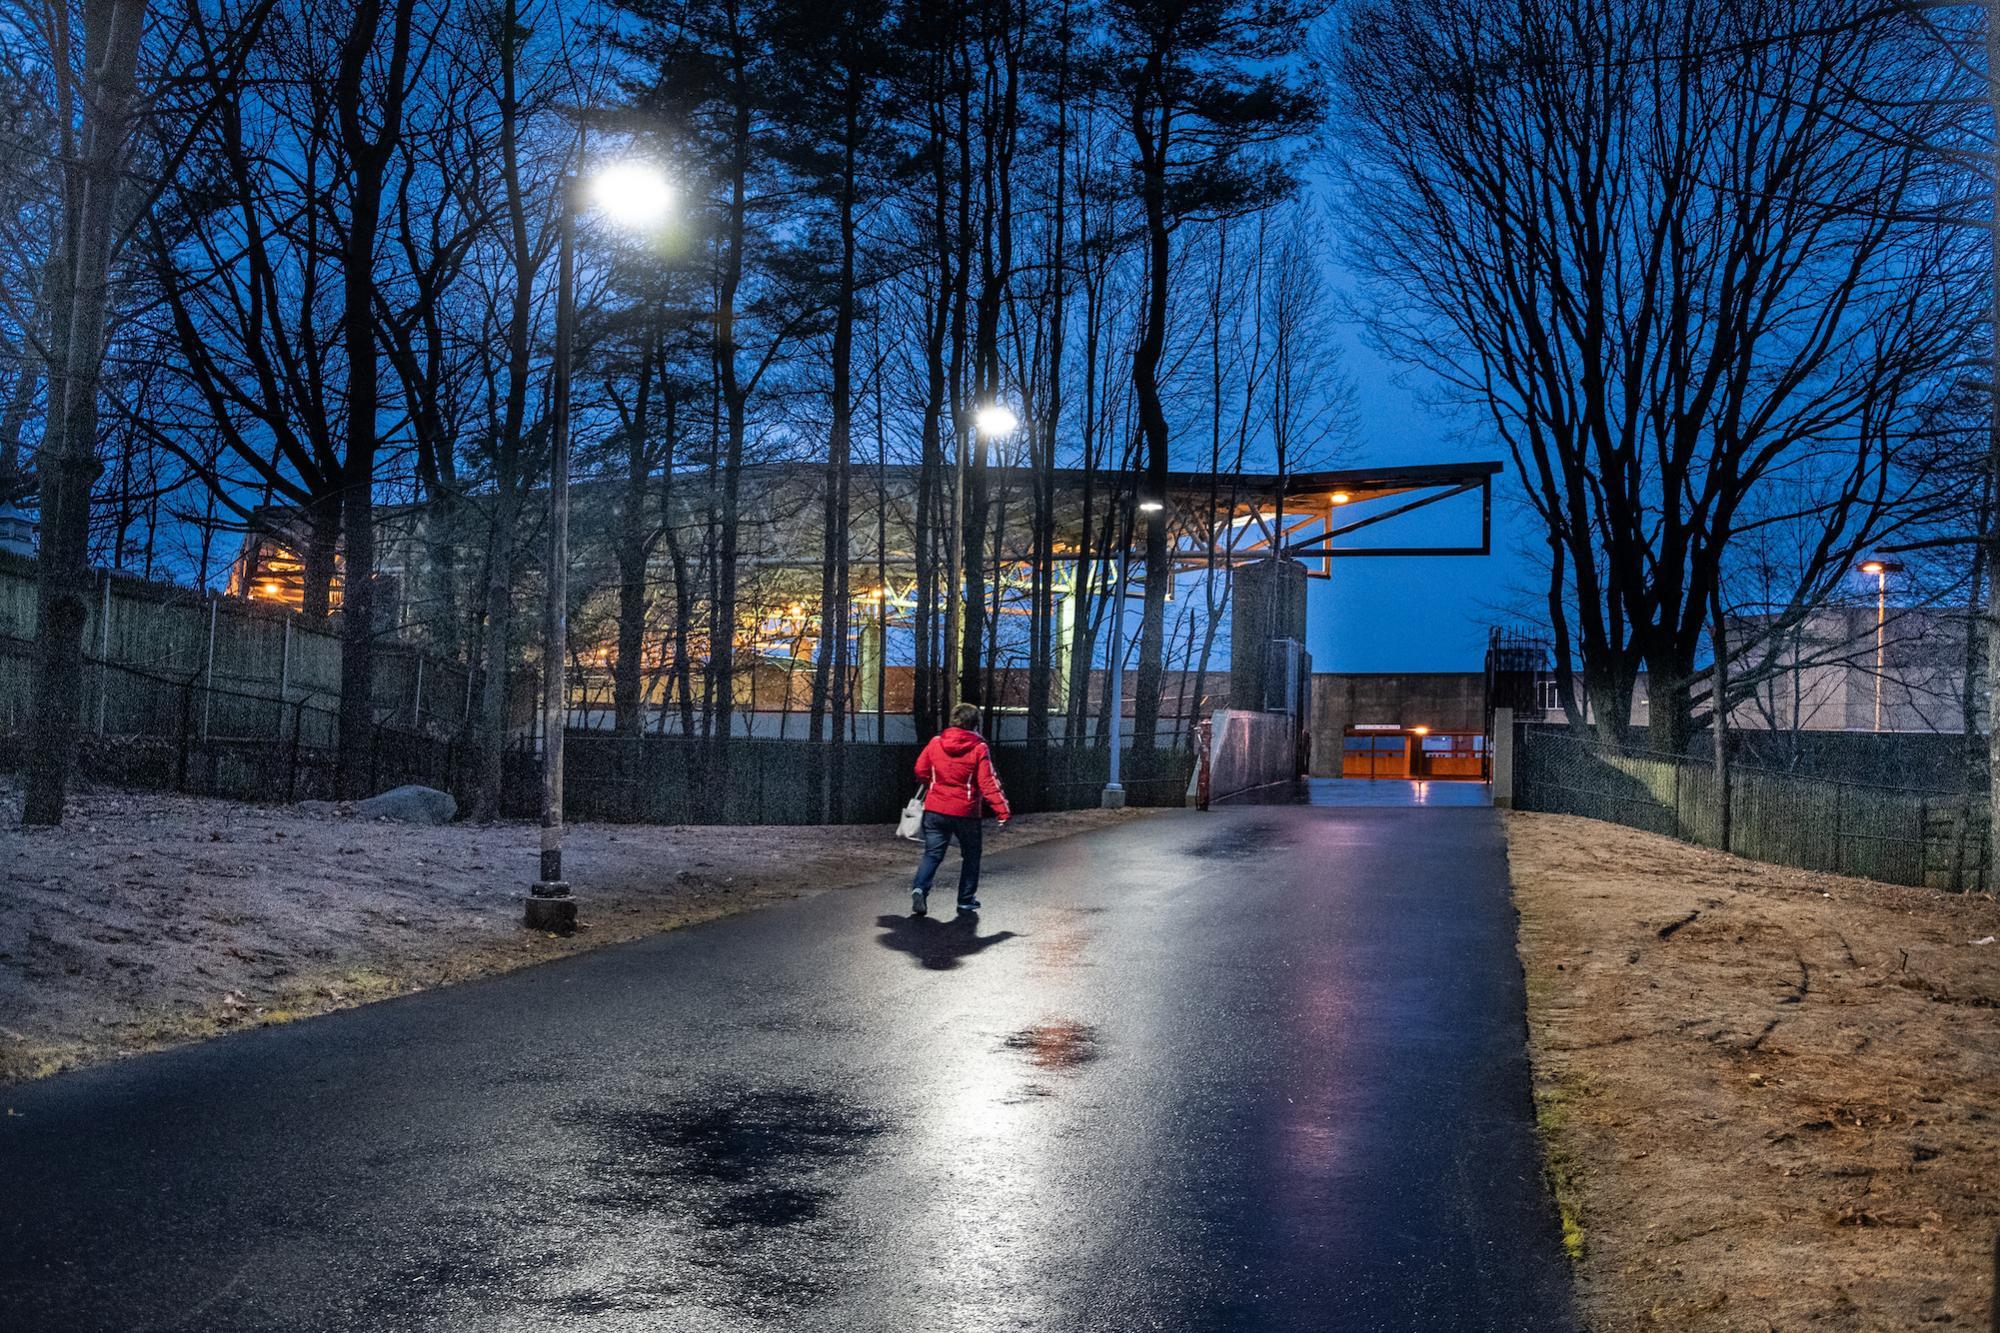 A woman walks on the paved path to the Quincy Adams gate